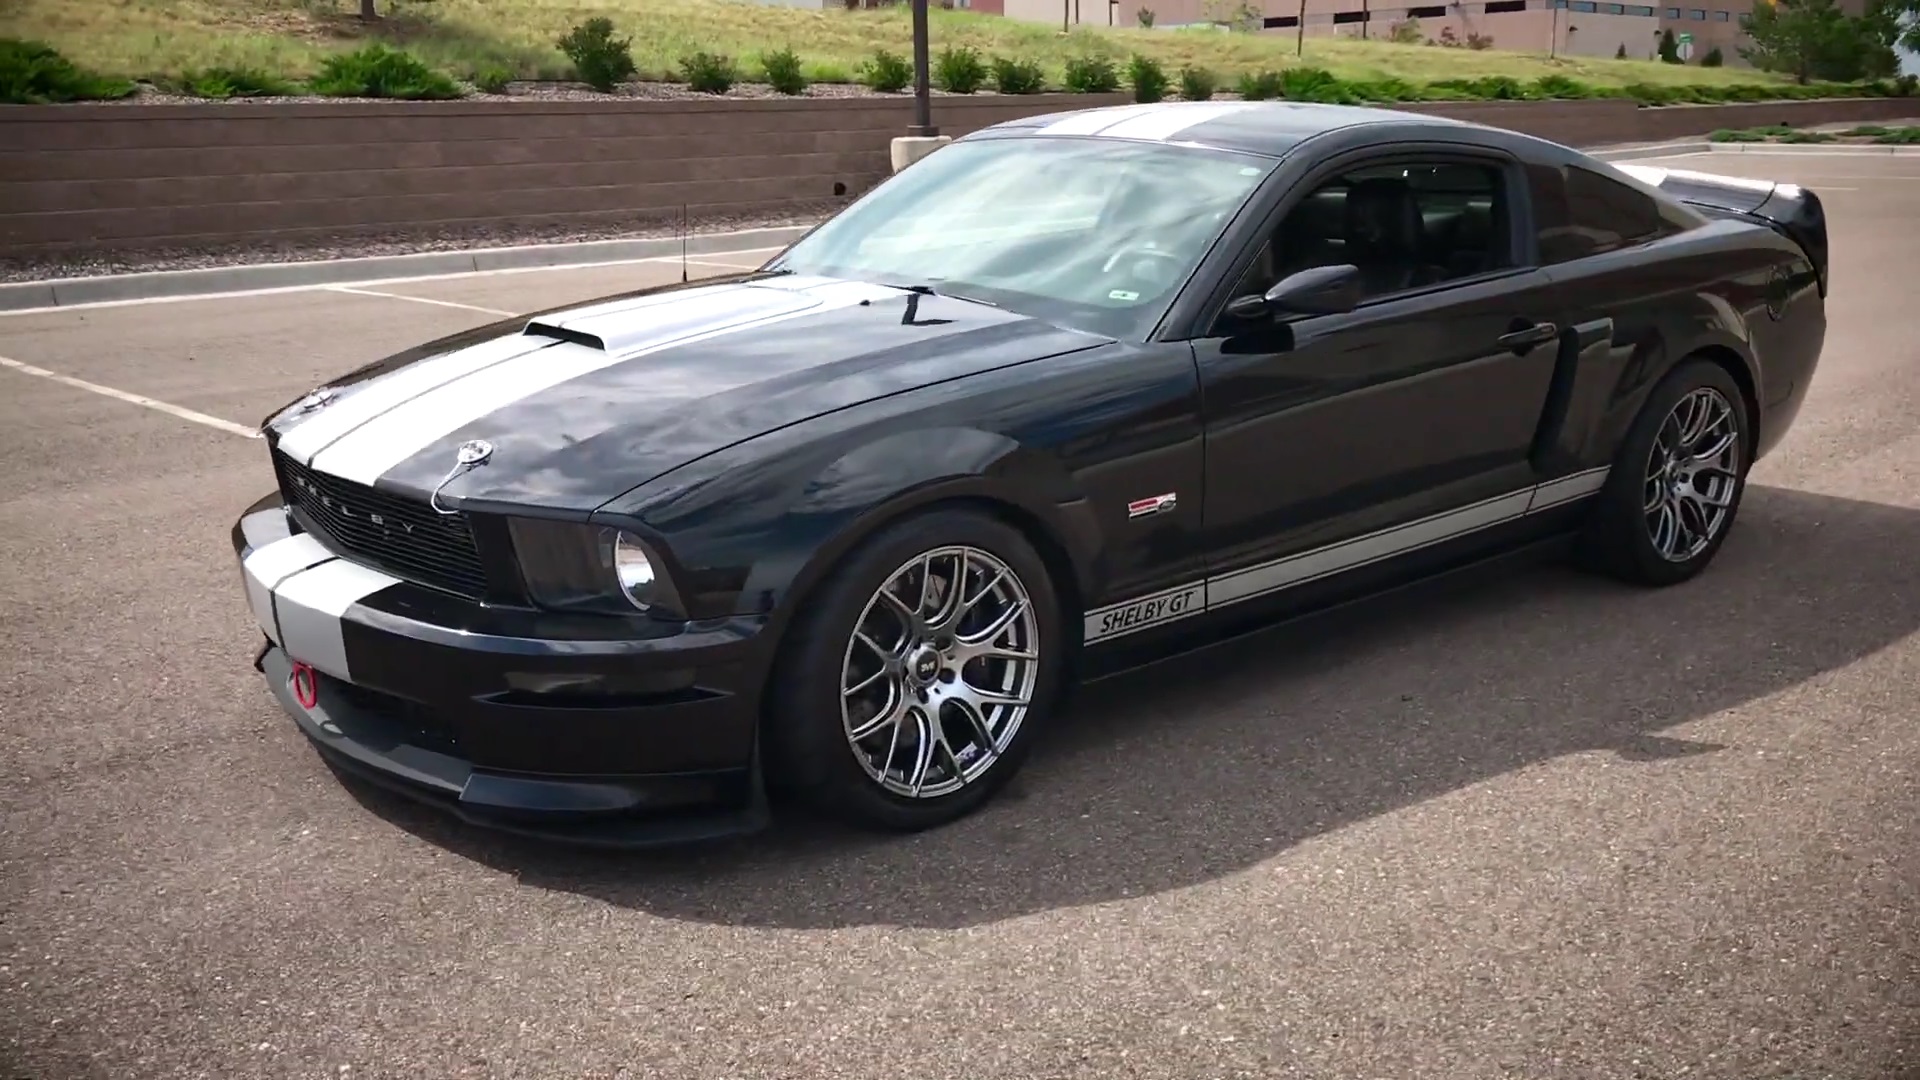 Video: 2007 Ford Mustang Shelby GT Walkaround